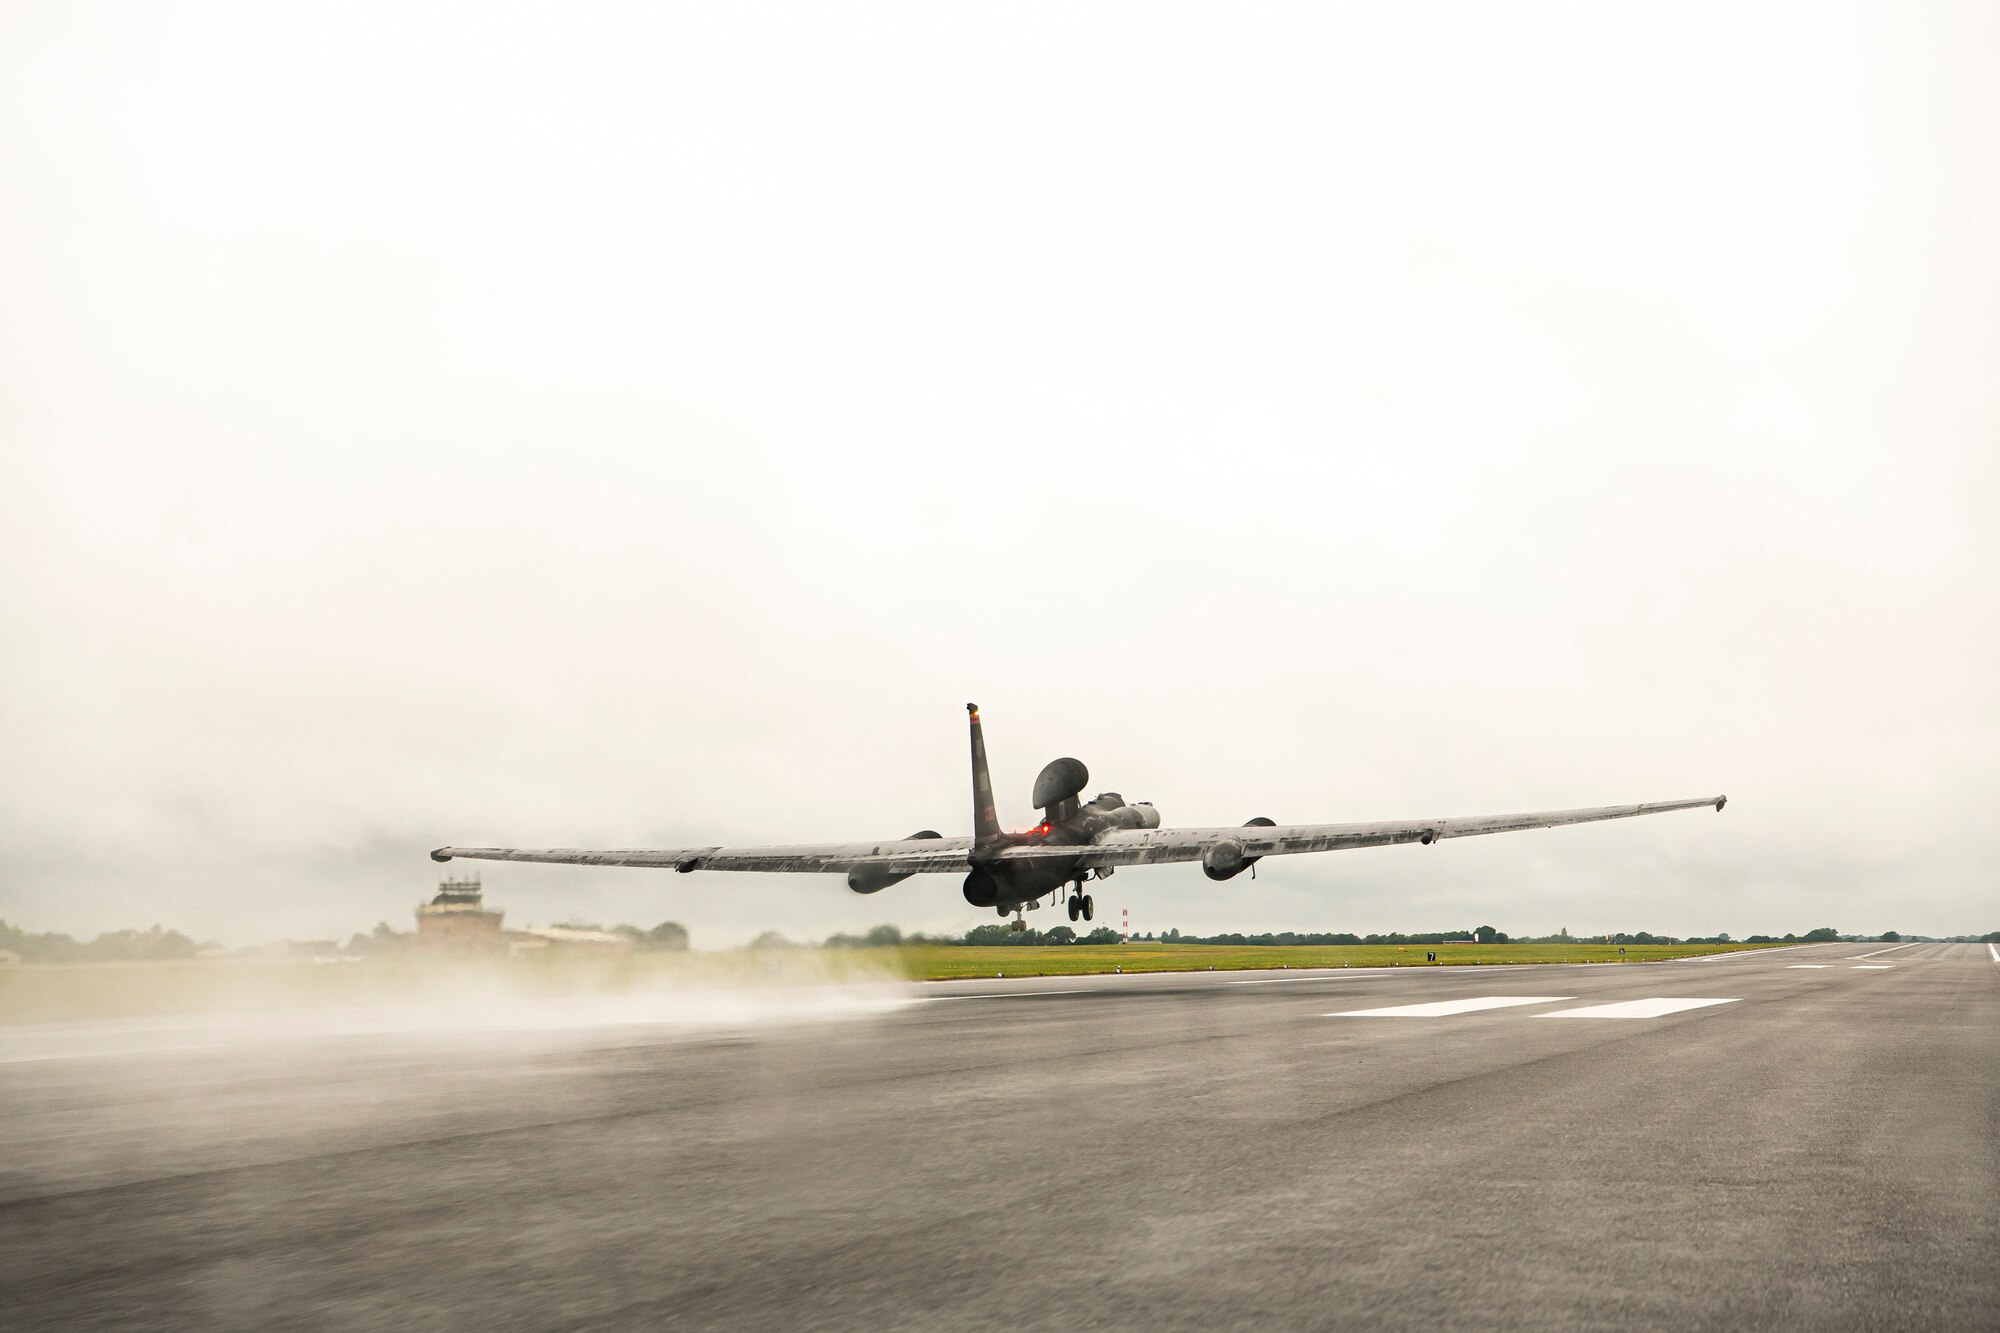 A U-2 Dragon Lady takes off from the runway at RAF Fairford, England, July 8, 2020. The U-2 aircraft assigned to the 9th Reconnaissance Wing, Beale Air Force Base, Calif., are currently deployed to RAF Fairford as part of the 99th Expeditionary Reconnaissance Squadron. The aircraft supplements a variety of missions that enhance regional and global security support in support of U.S. and NATO allies and regional partners. (U.S. Air Force photo by Senior Airman Eugene Oliver)